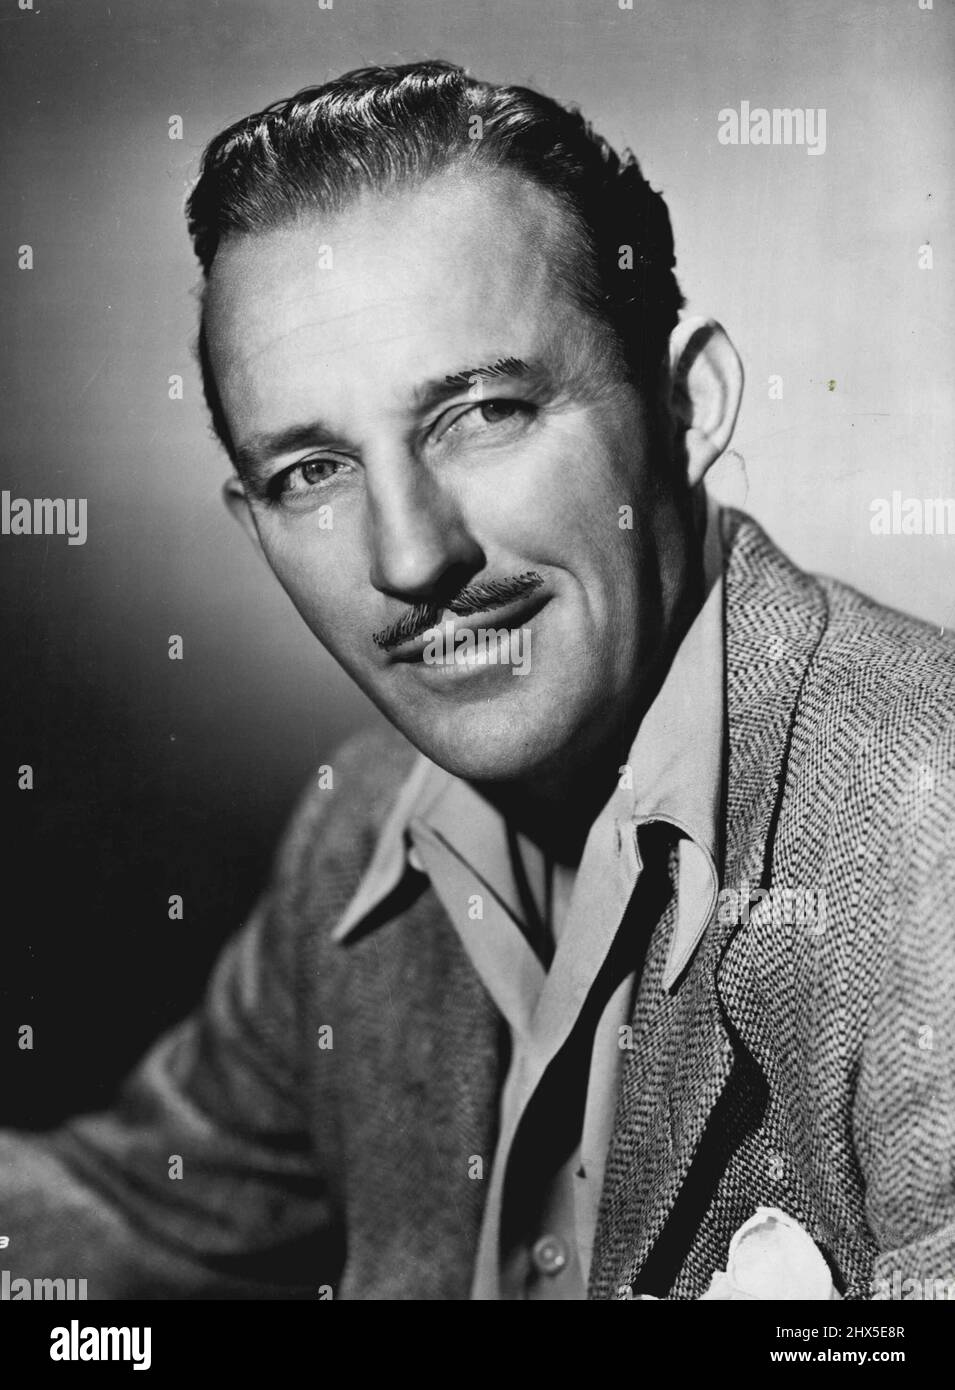 Bing Crosby -- 'I admit my upper lip has a wrinkle here and there, but let's keep it clean. October 22, 1953. (Photo by G. K. Austin) Stock Photo